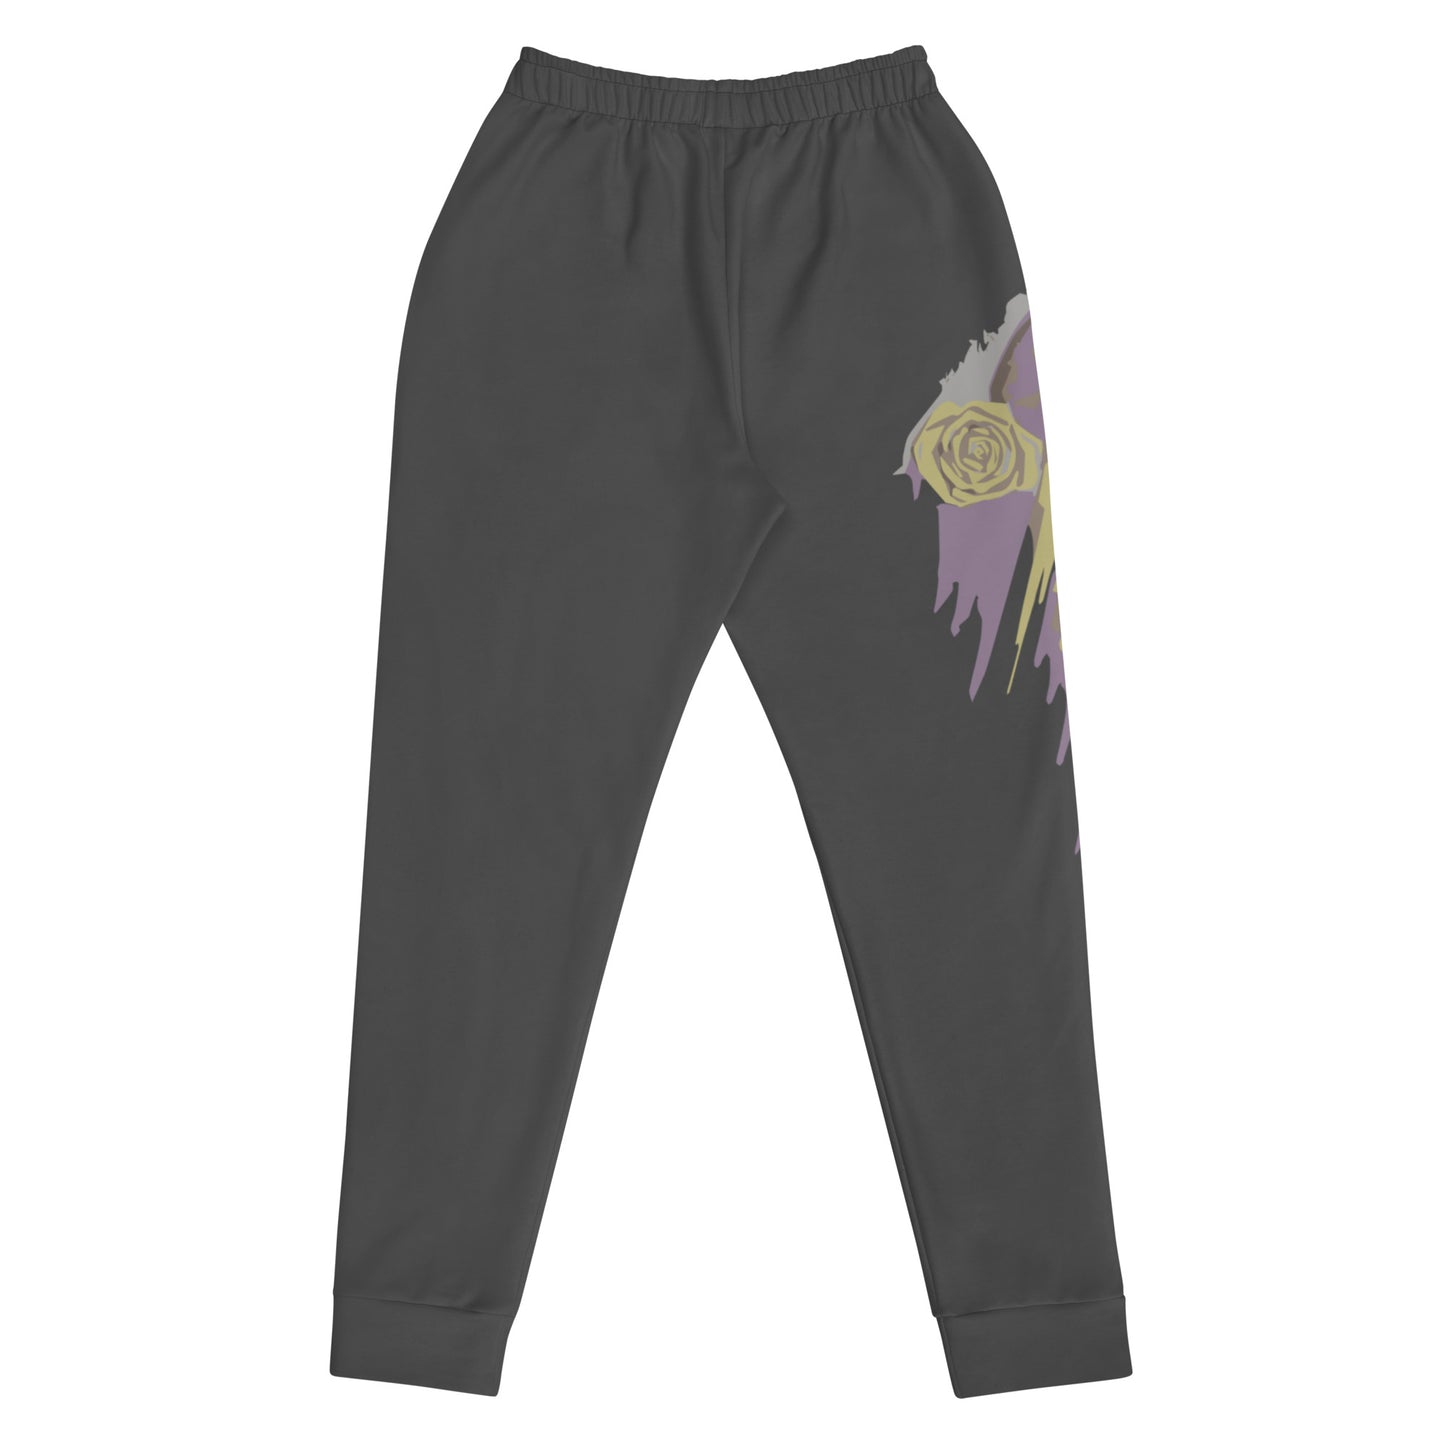 Skull 'N' Roses Fitted Women's Joggers